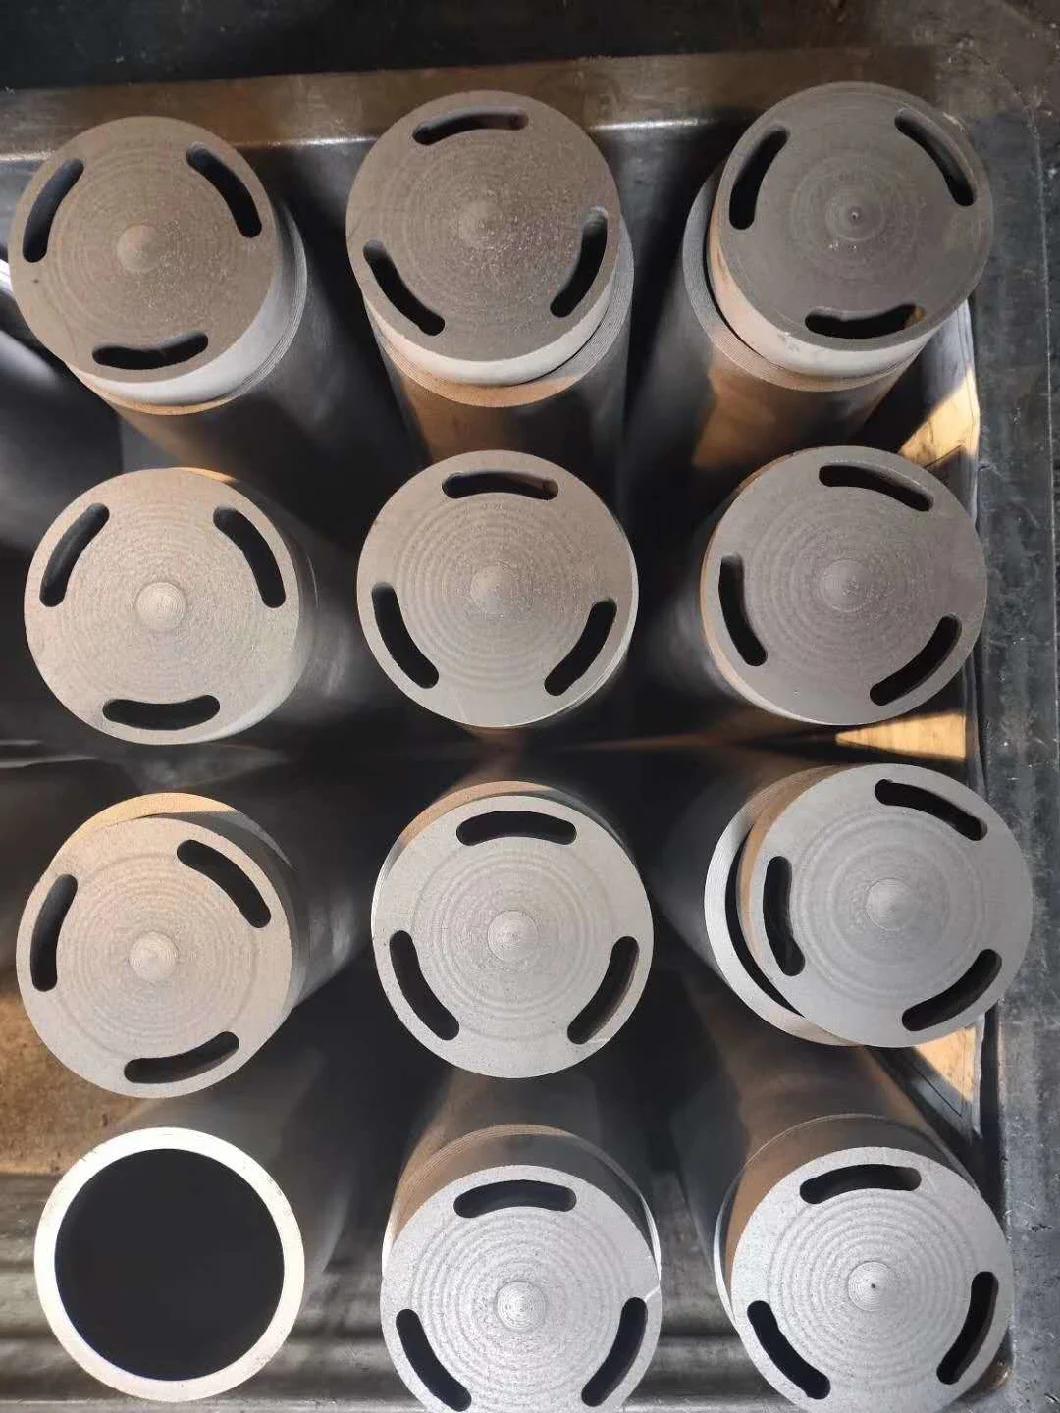 Different Holes Round Hexagonal Gear Square Graphite Mold for Horizontal Continuous Casting Brass